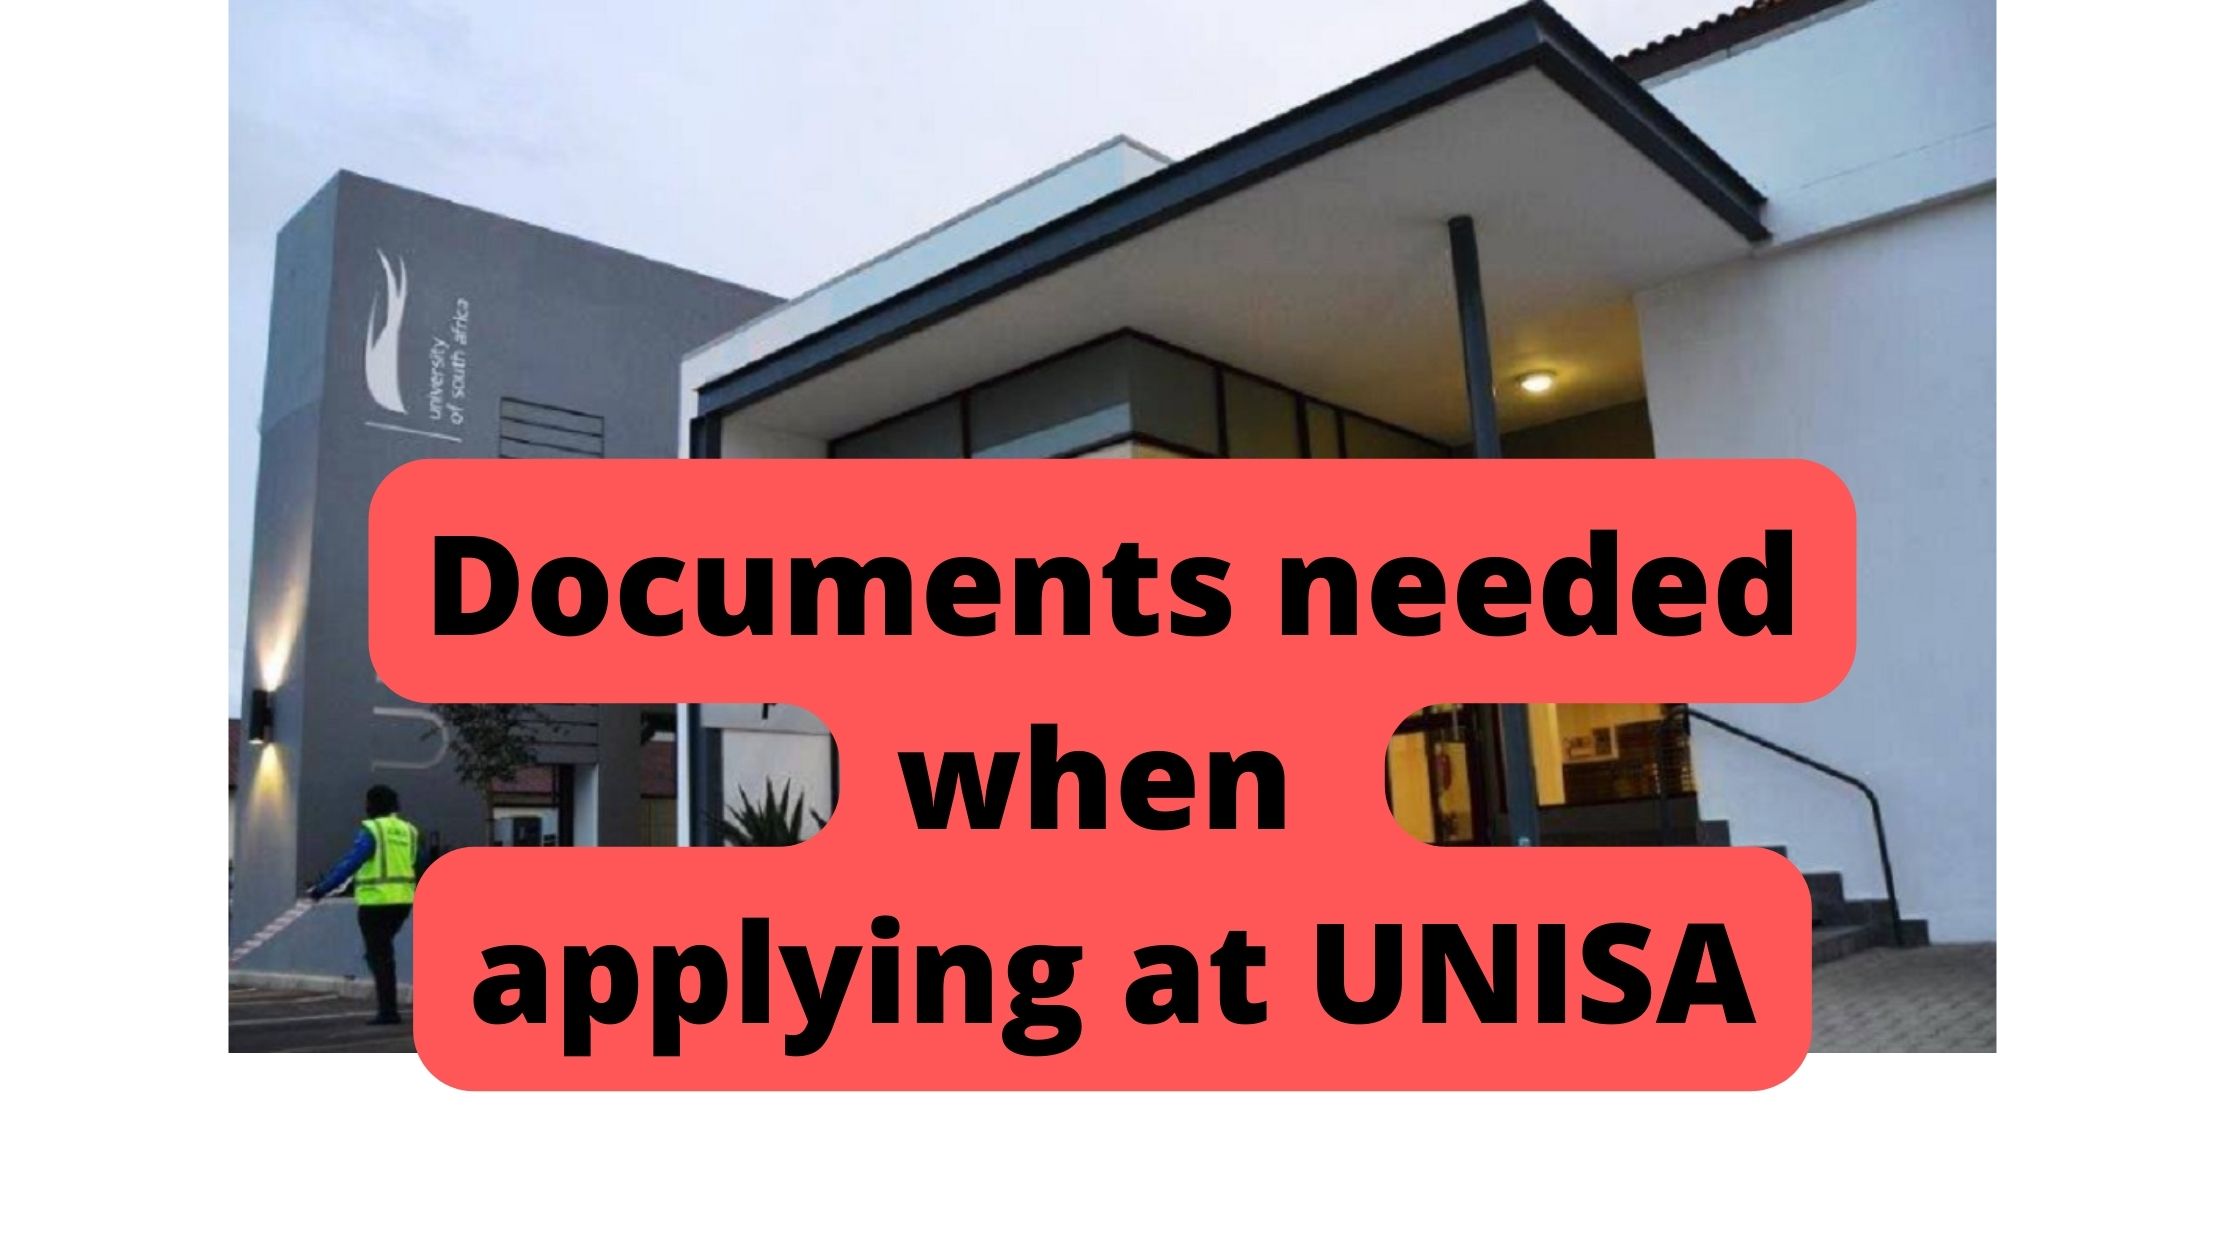 Documents needed when applying at UNISA